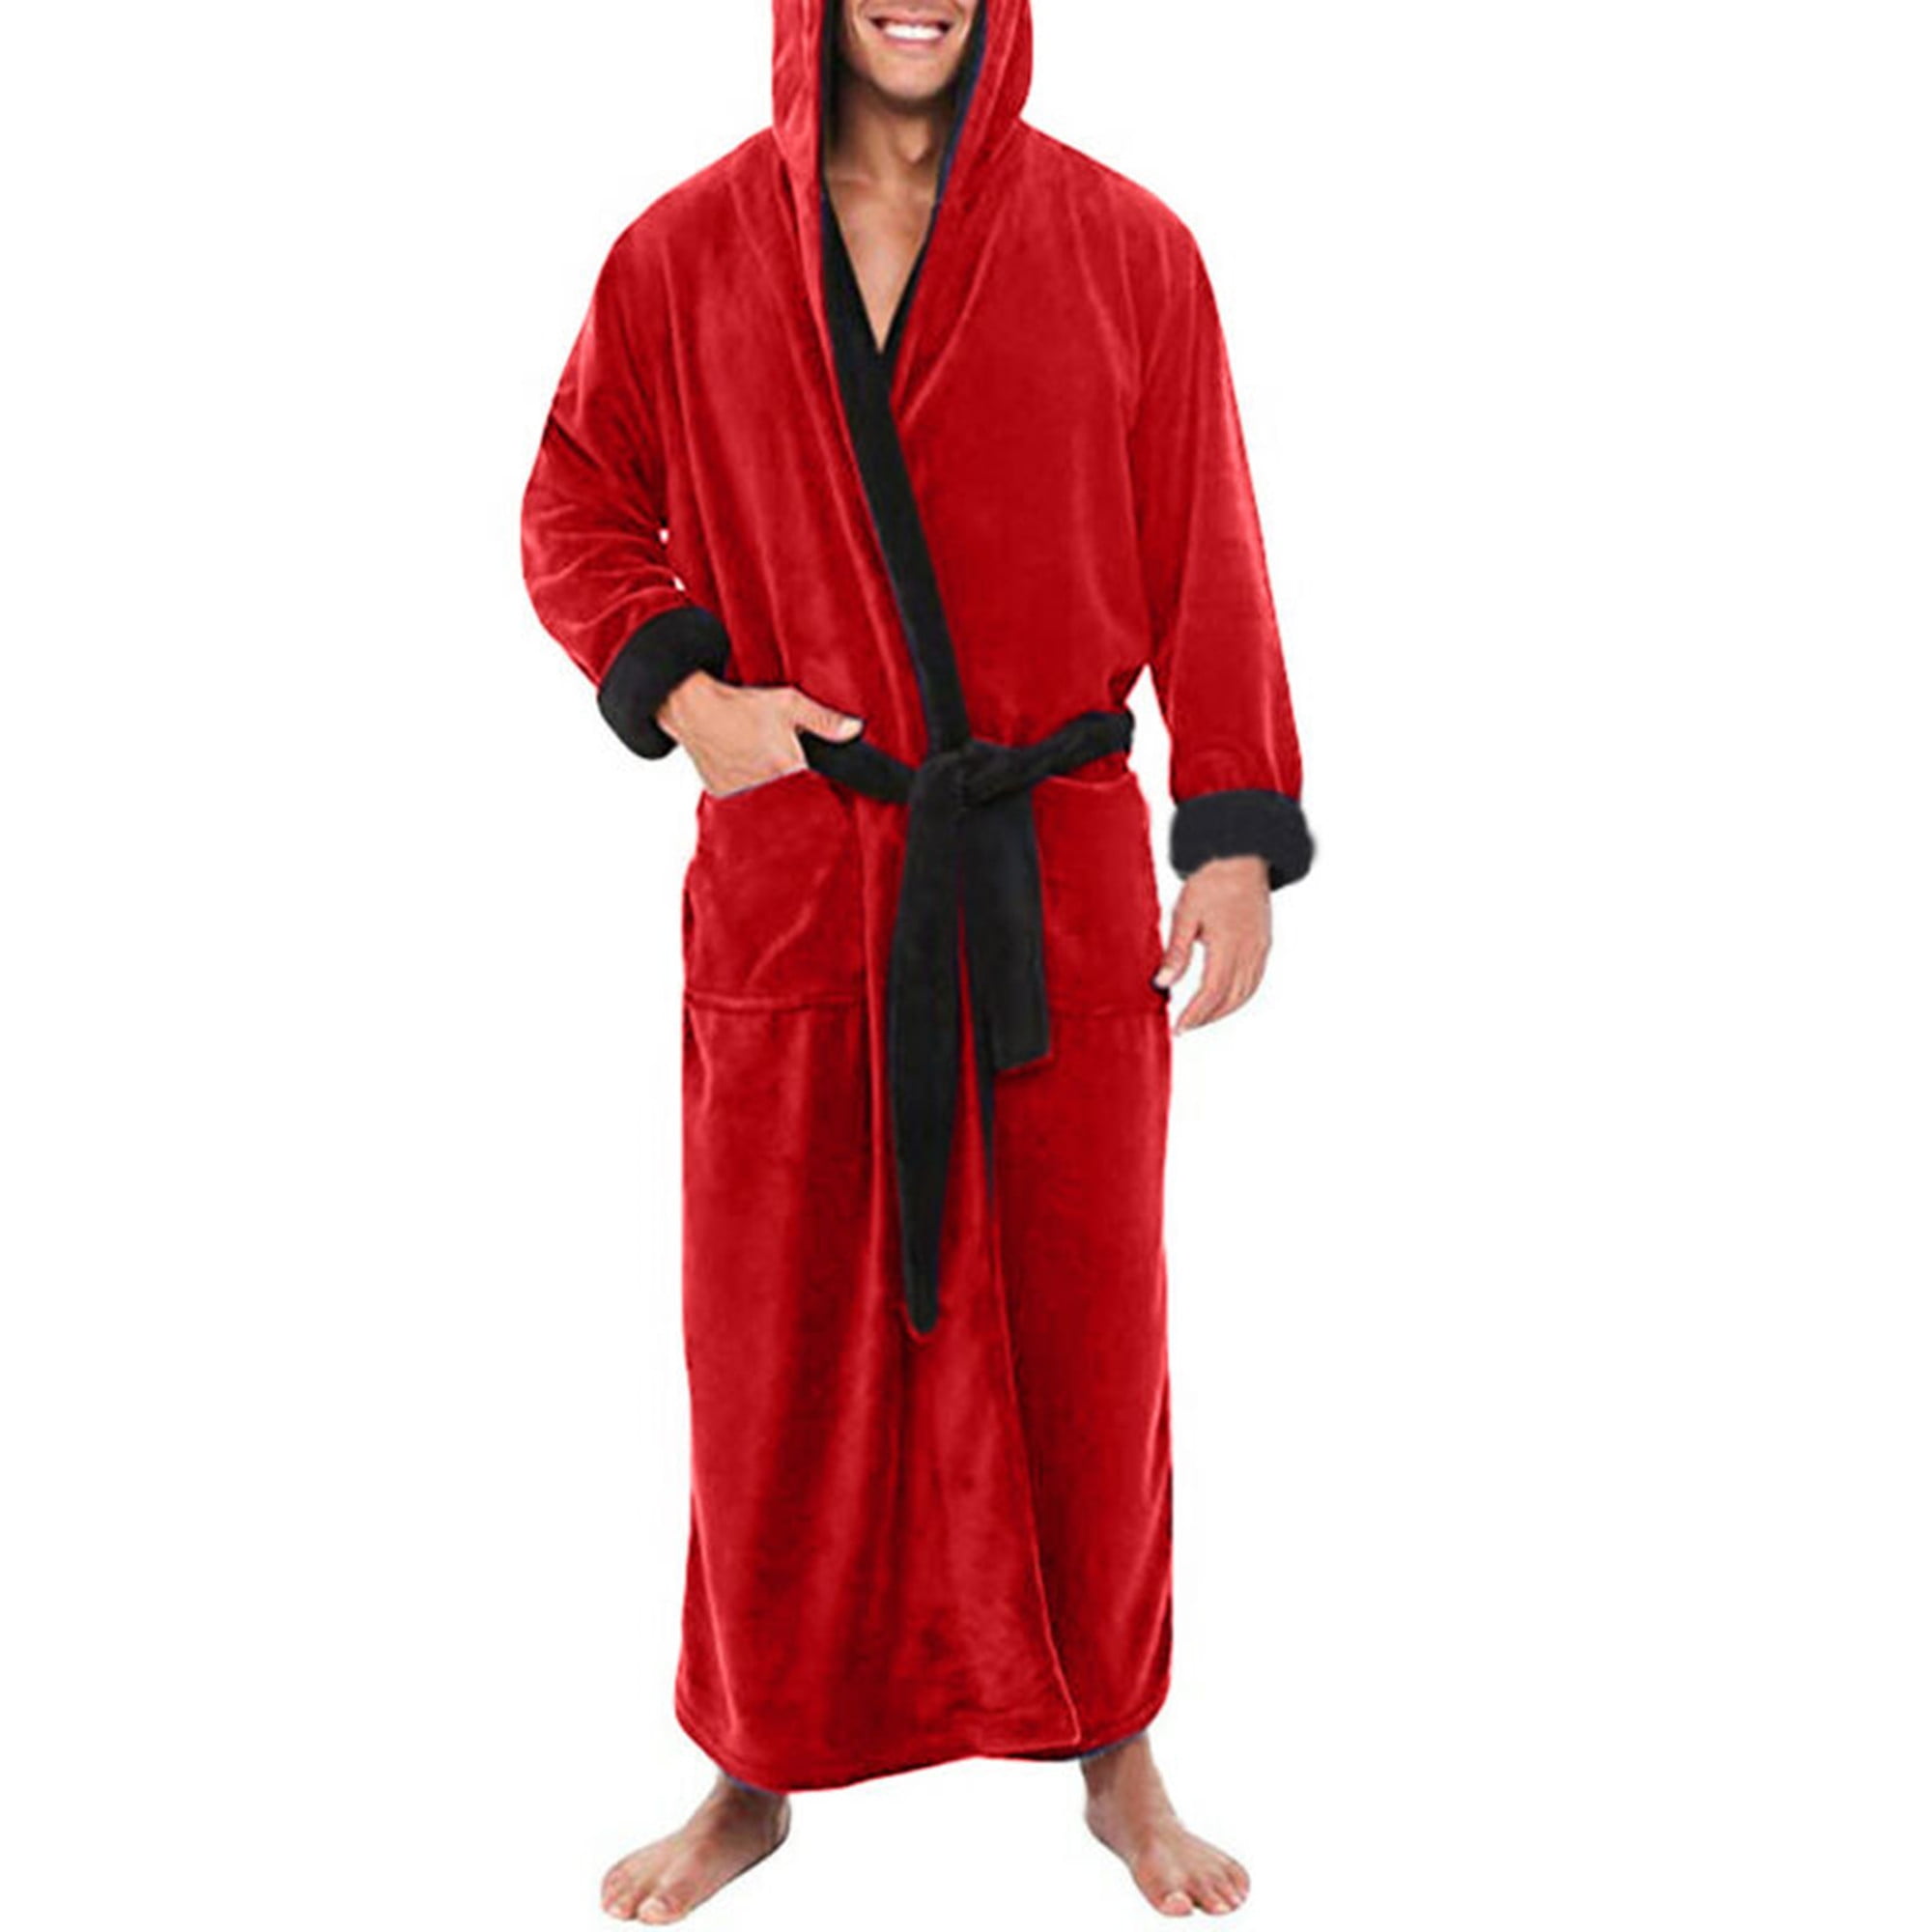 Mens Luxury Soft Hooded dressing gown robe Tie Front Pockets Size Medium to 5XL 